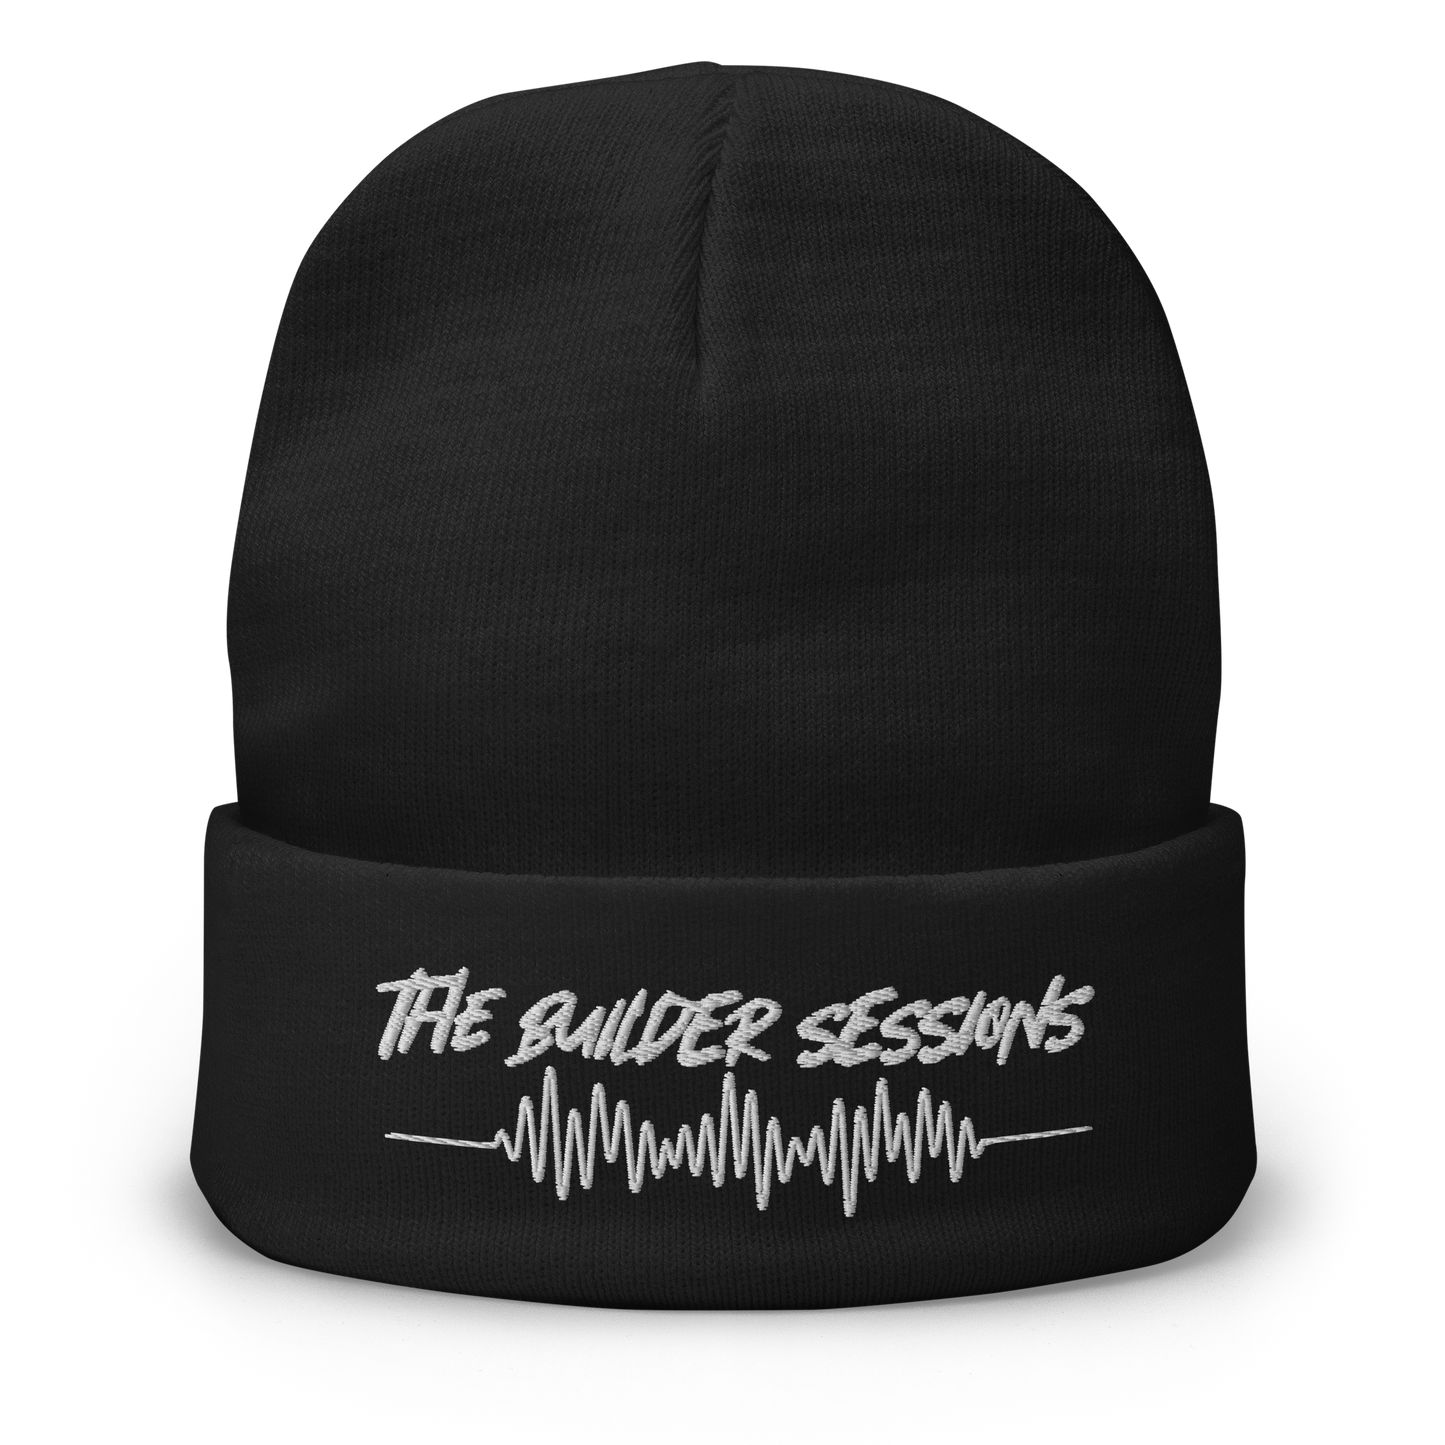 The Builder Sessions Beanie